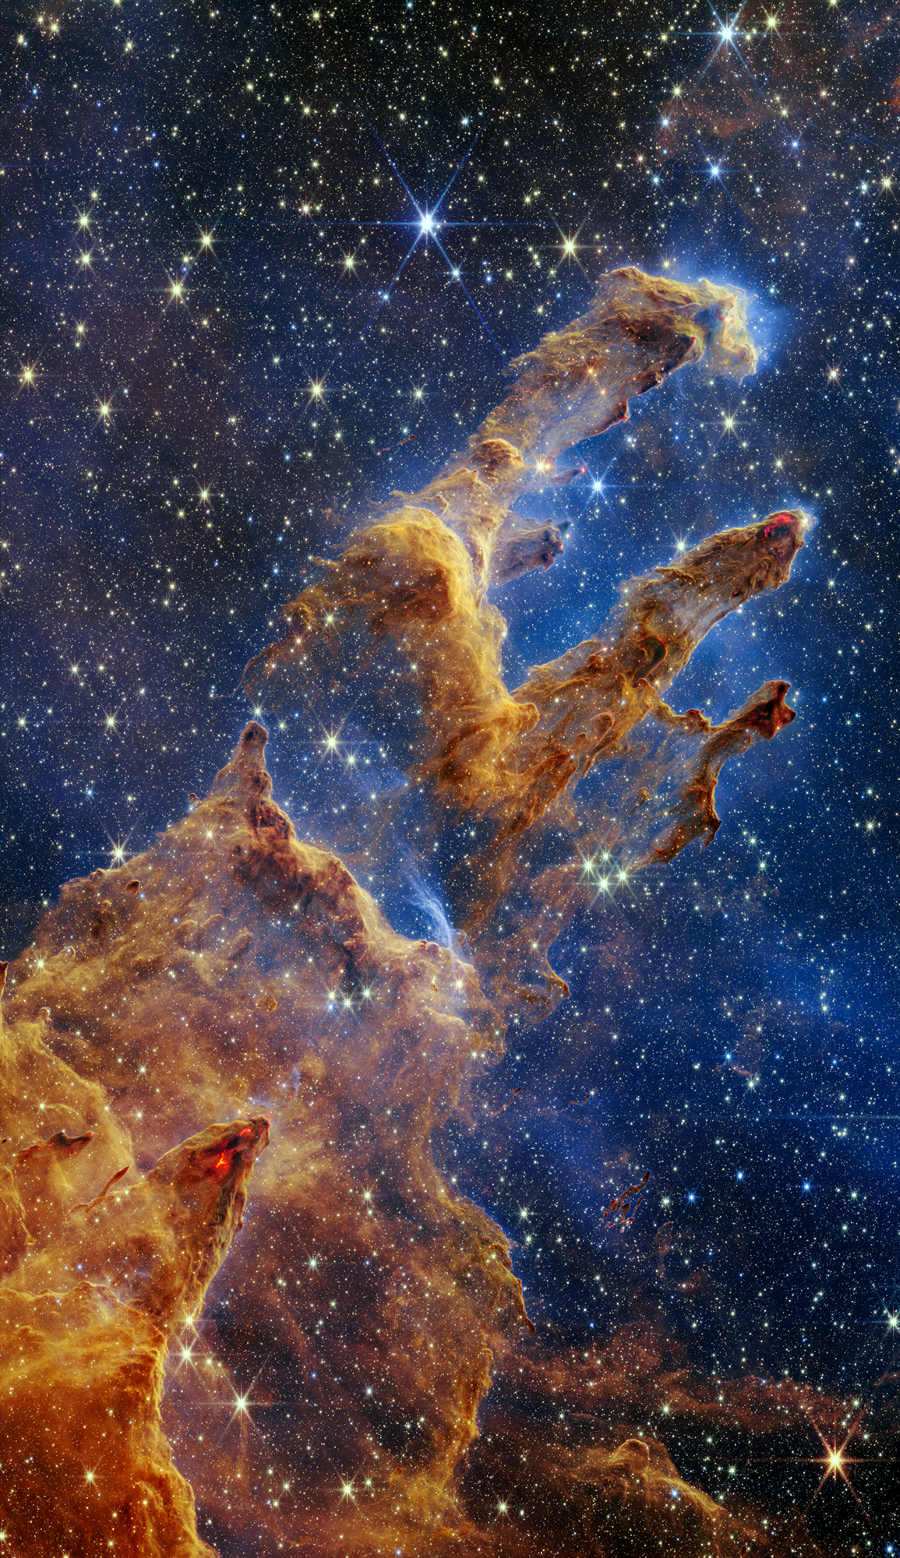 The Pillars of Creation imaged by the James Webb Space Telescope